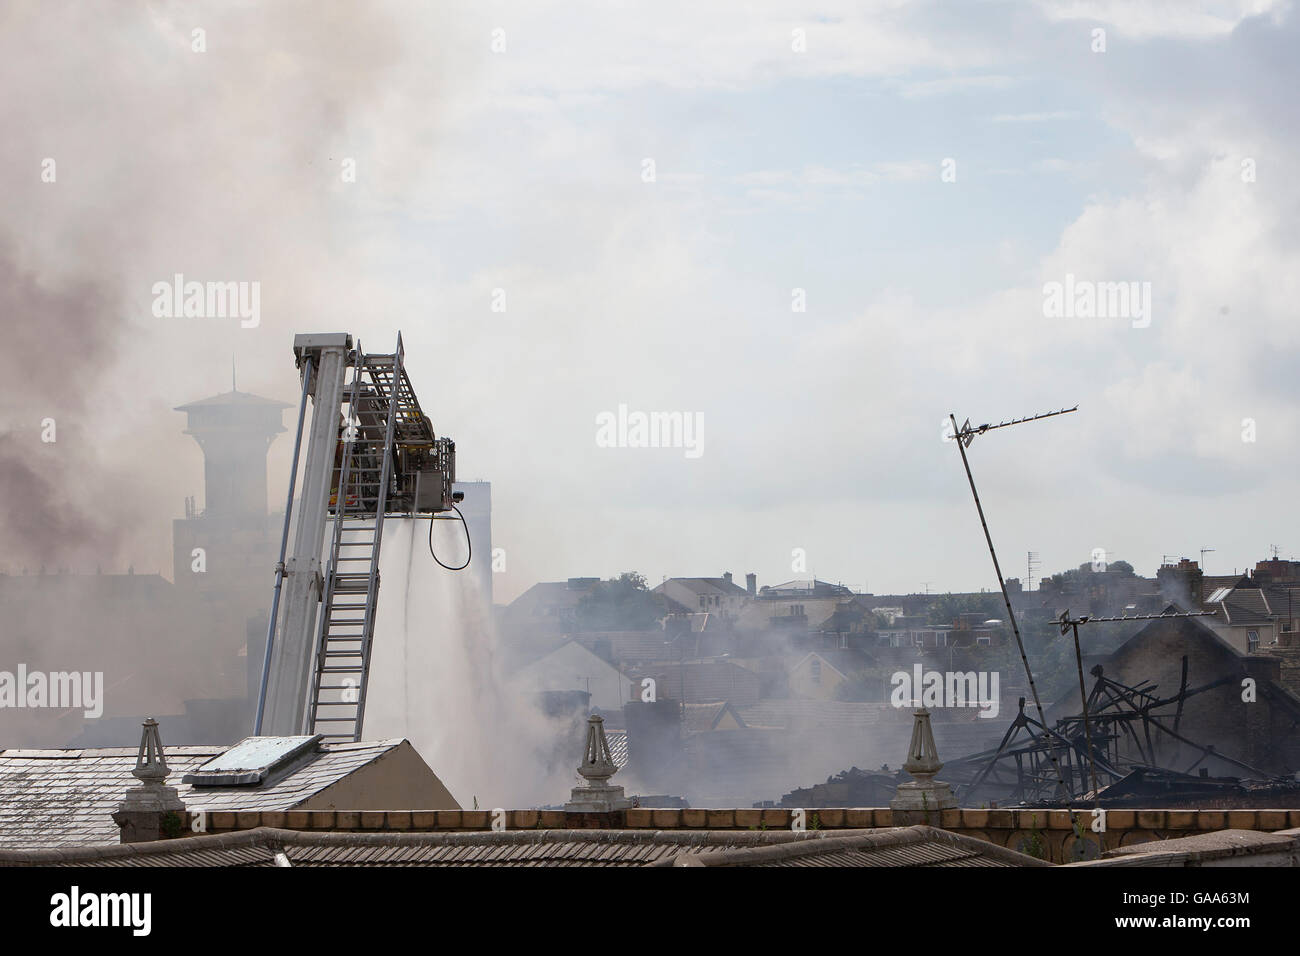 Great Yarmouth Uk 5th Aug 2016 Fire Fighters Attending Fire At An Indoor Market And Bowling